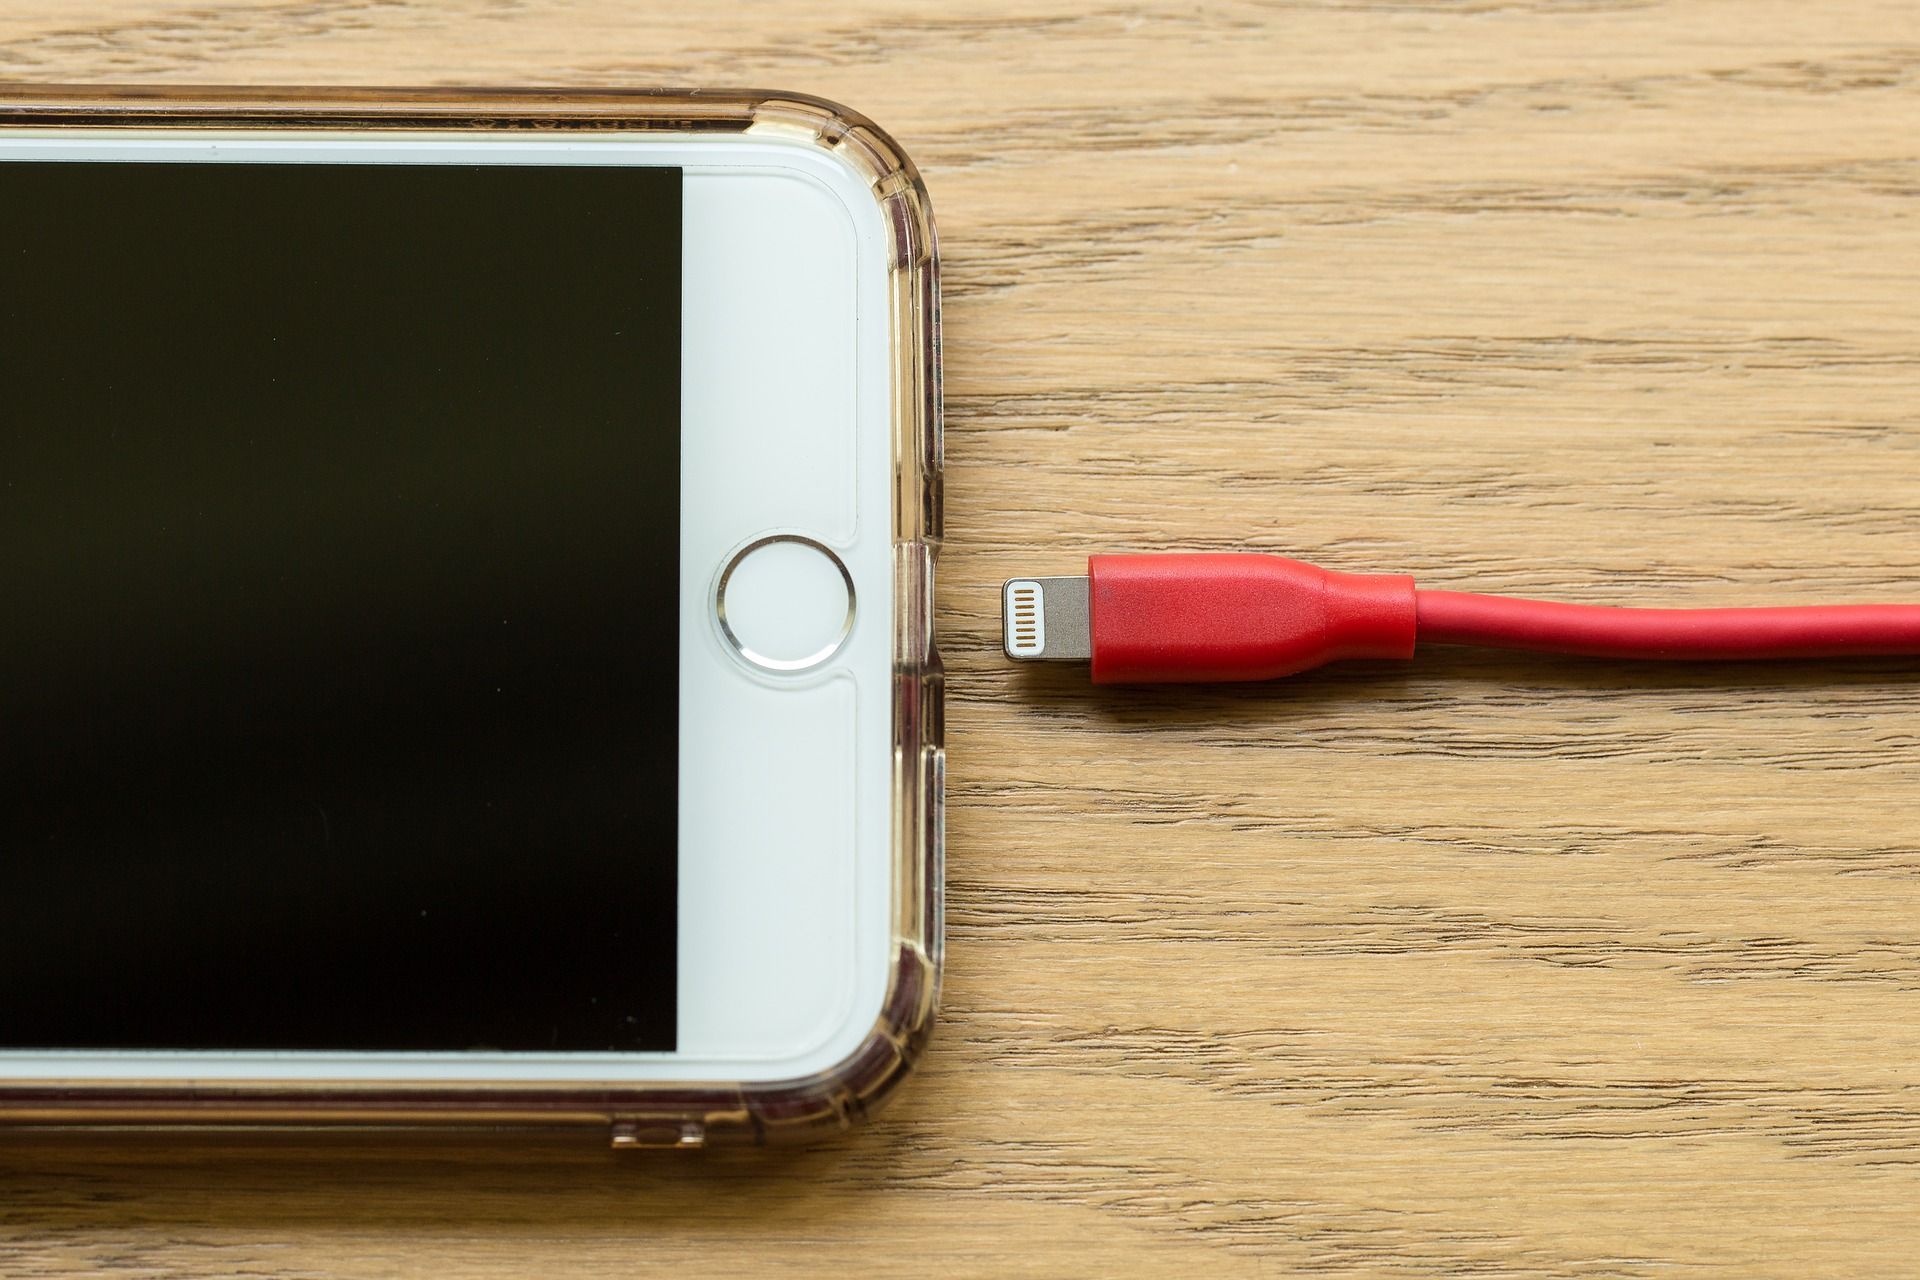 An iphone with a charging cable ready to plug in